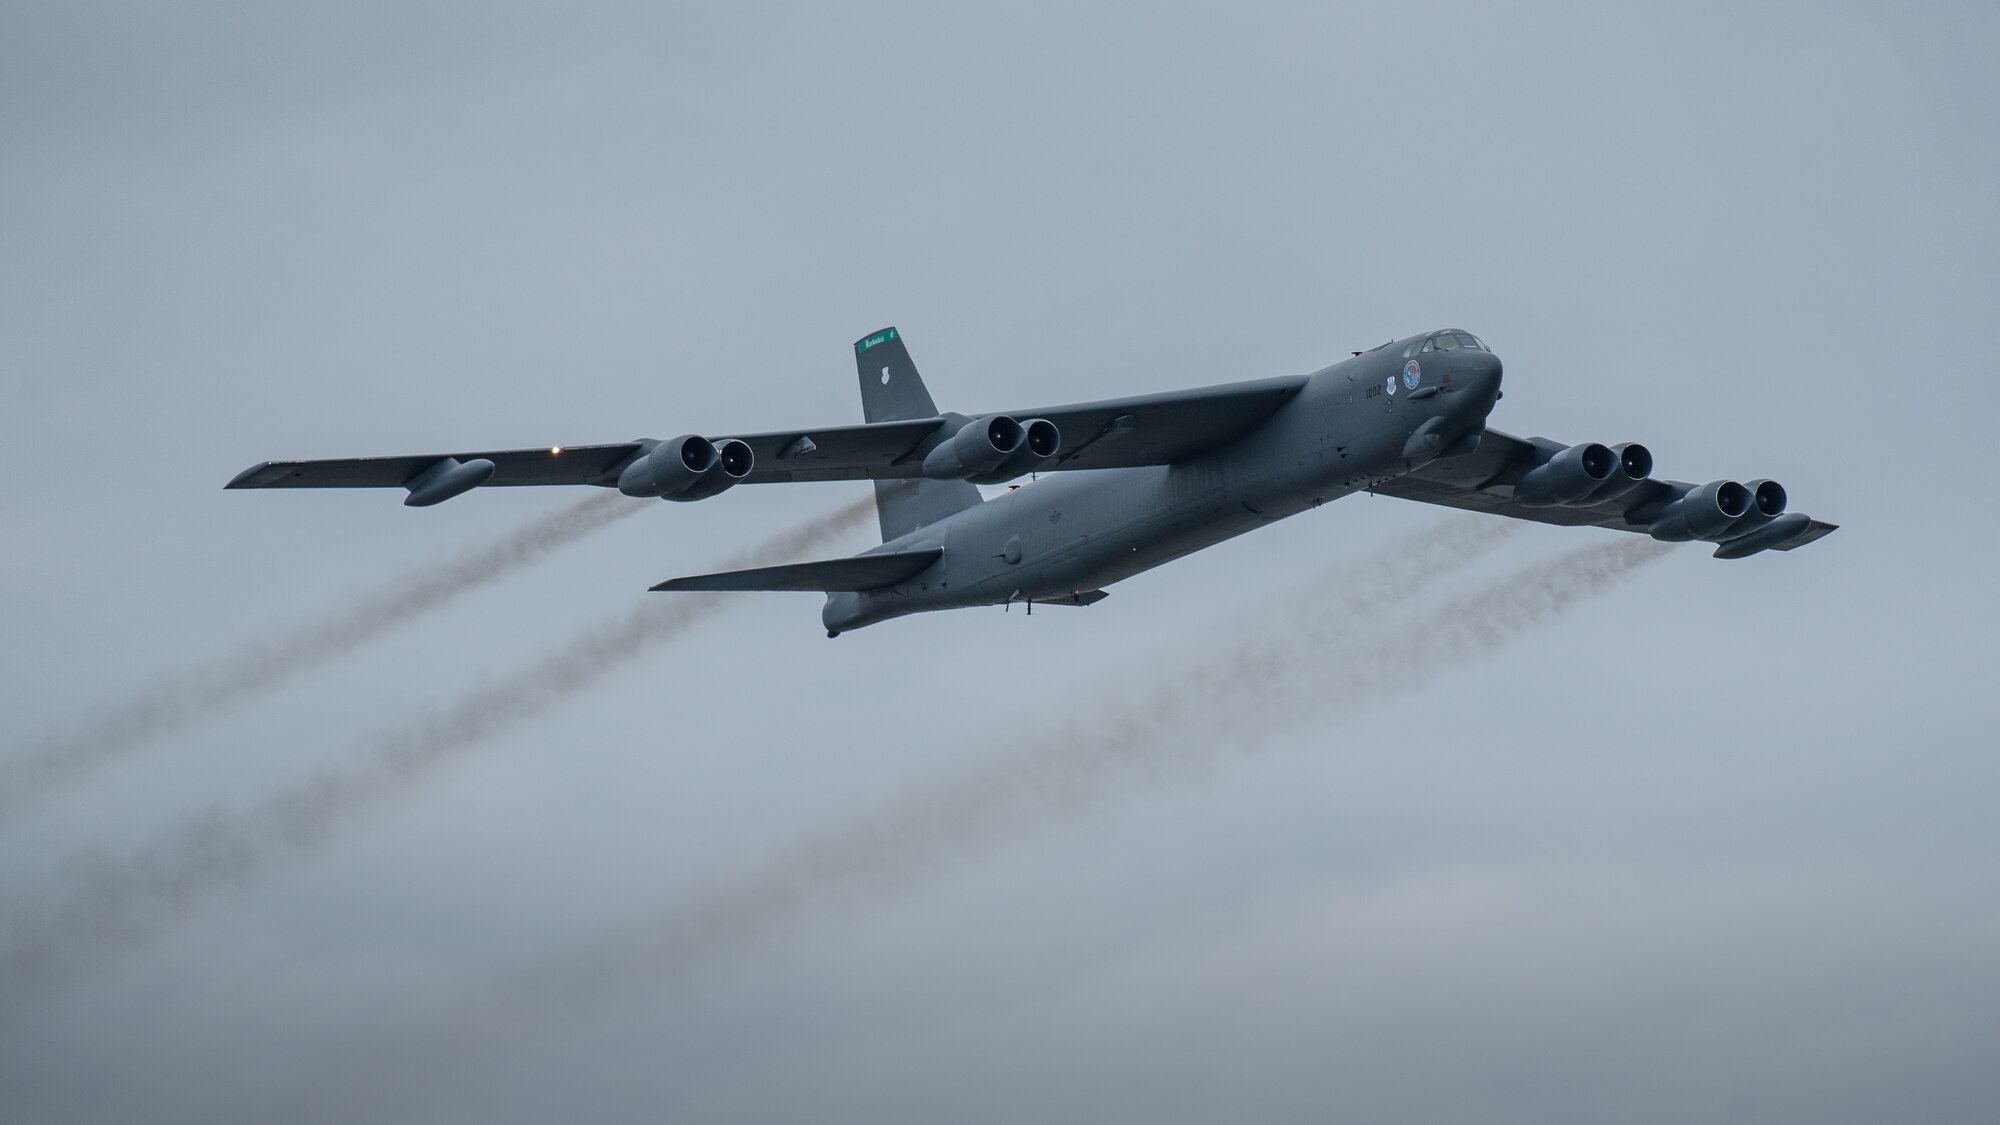 A U.S. Air Force B-52 Stratofortress from the 2nd Bomb Wing at Barksdale Air Force Base, La., performs an aerial demonstration during the Thunder Over Louisville airshow in Louisville, Ky., April 13, 2019. The Kentucky Air National Guard once again served as the base of operations for military aircraft participating in the annual event, which has grown to become one of the largest single-day air shows in North America. (U.S. Air National Guard photo by Dale Greer)